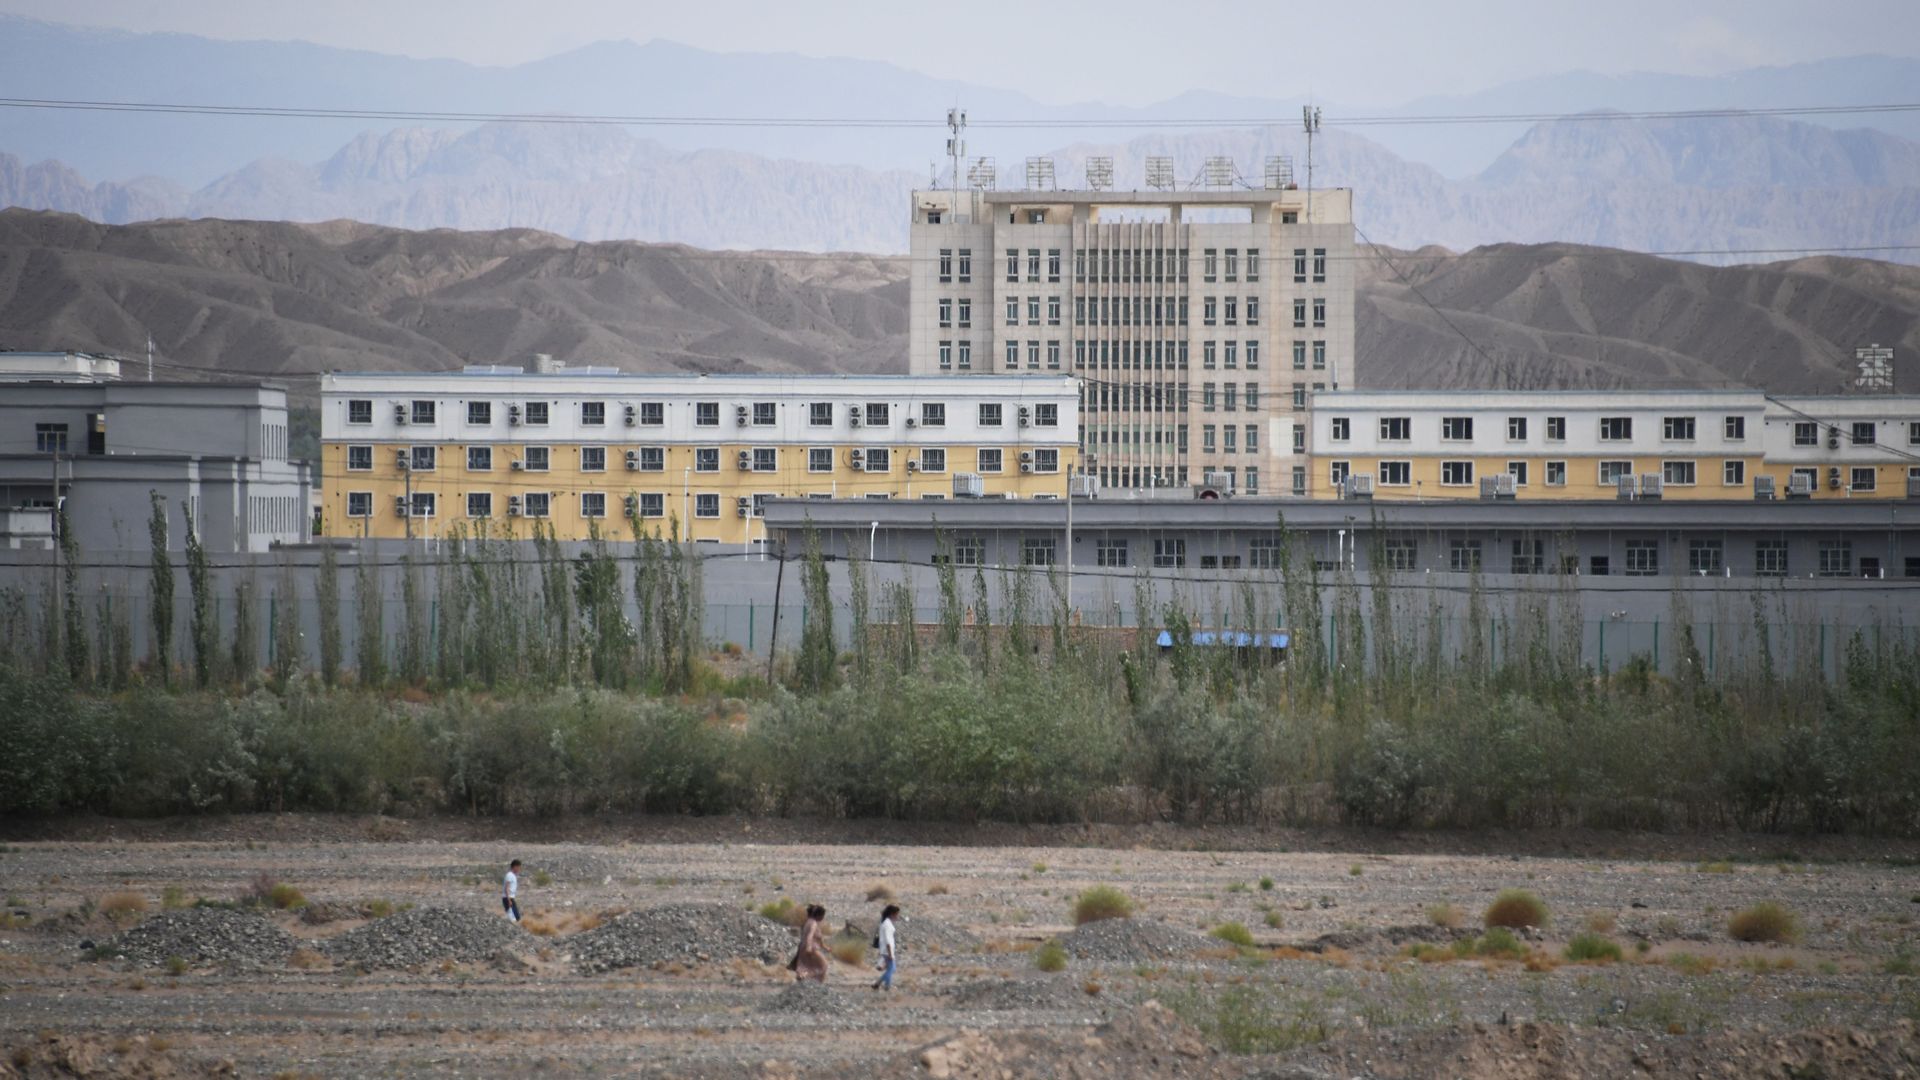  This photo taken on June 2, 2019 shows what's believed to be a re-education camp where mostly Muslim ethnic minorities are detained, north of Kashgar in China's northwestern Xinjiang region.